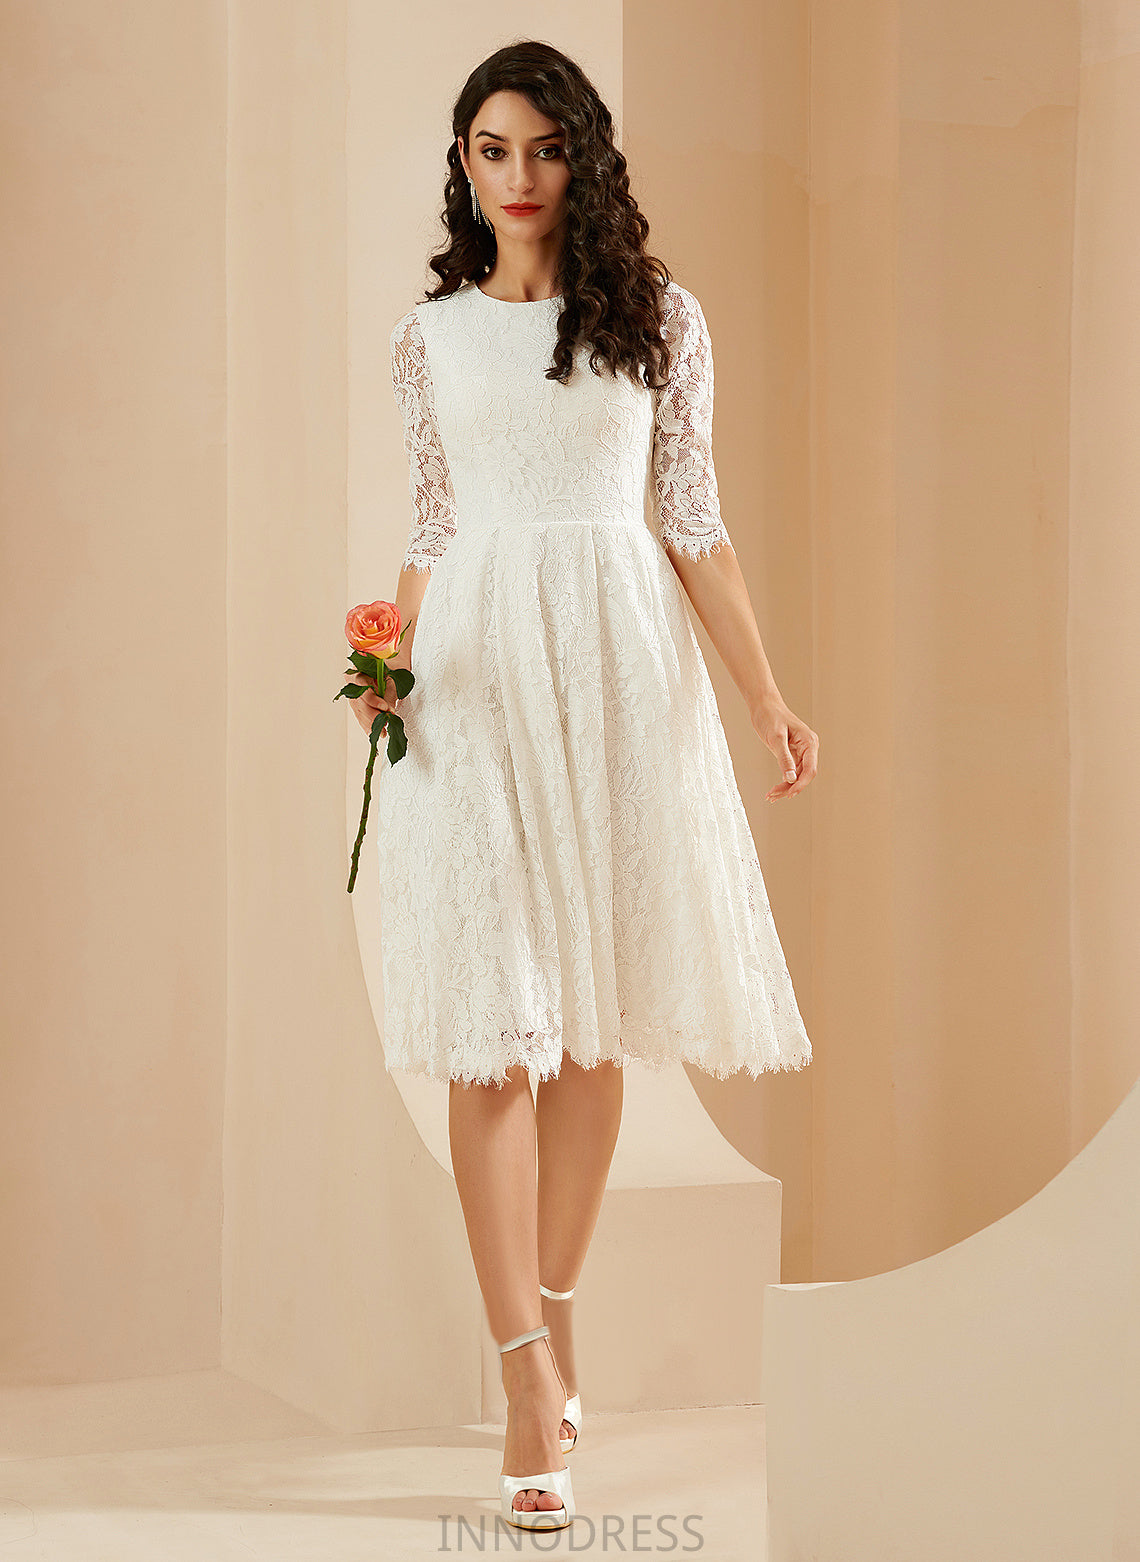 Lace Wedding Dresses Scoop Knee-Length Nathaly Dress A-Line Wedding